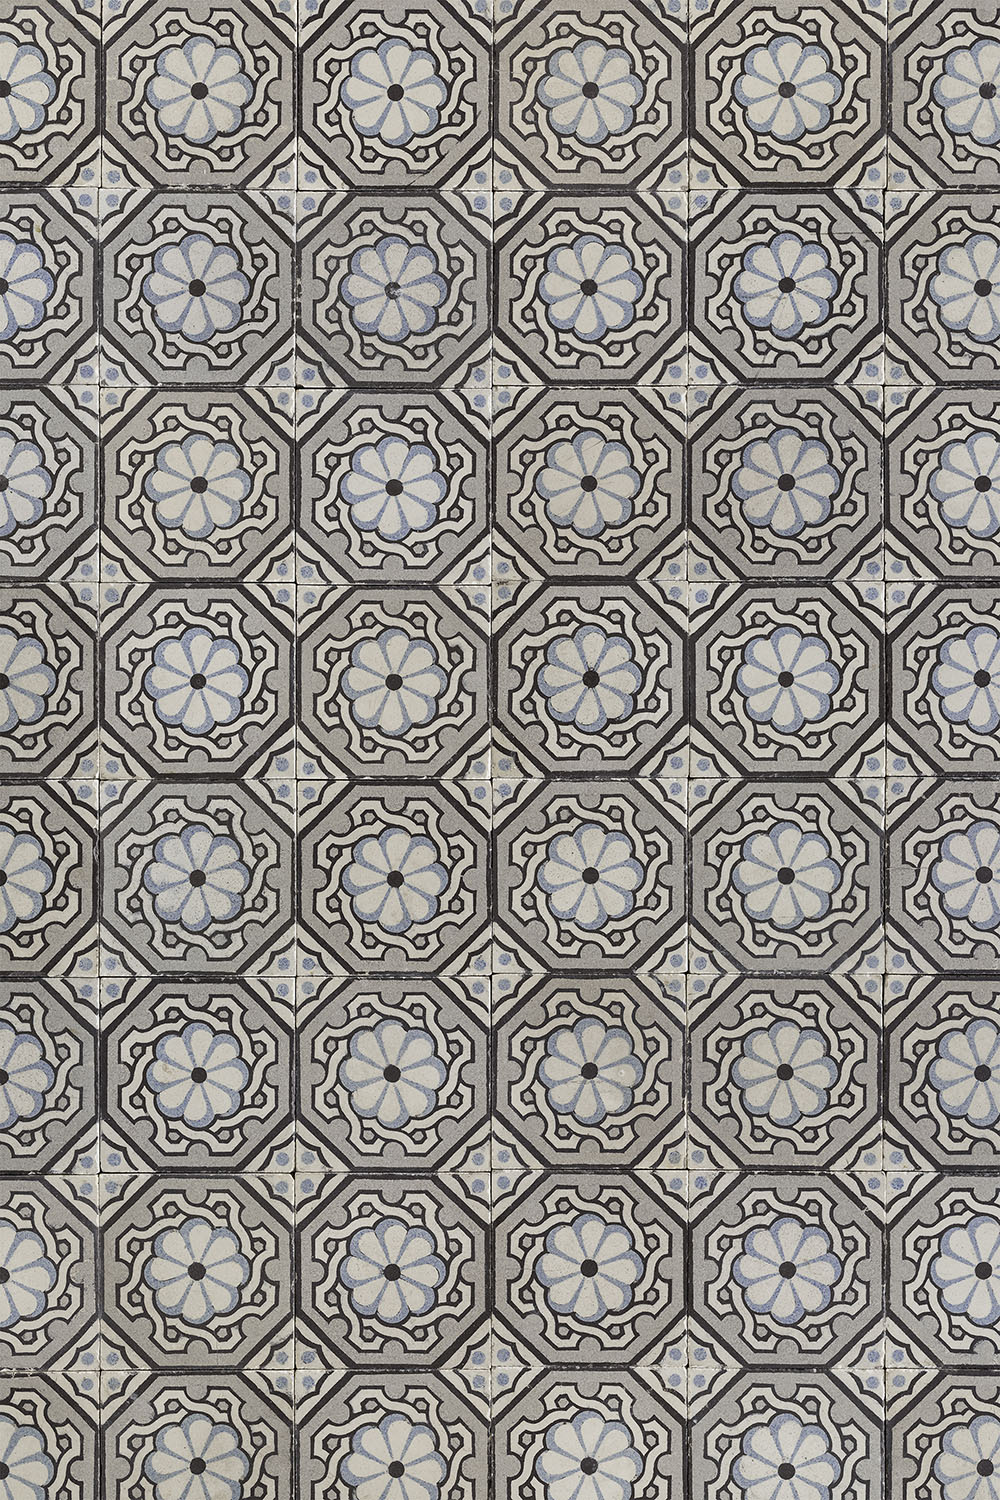 Cloister tiles photography background with charming flower pattern